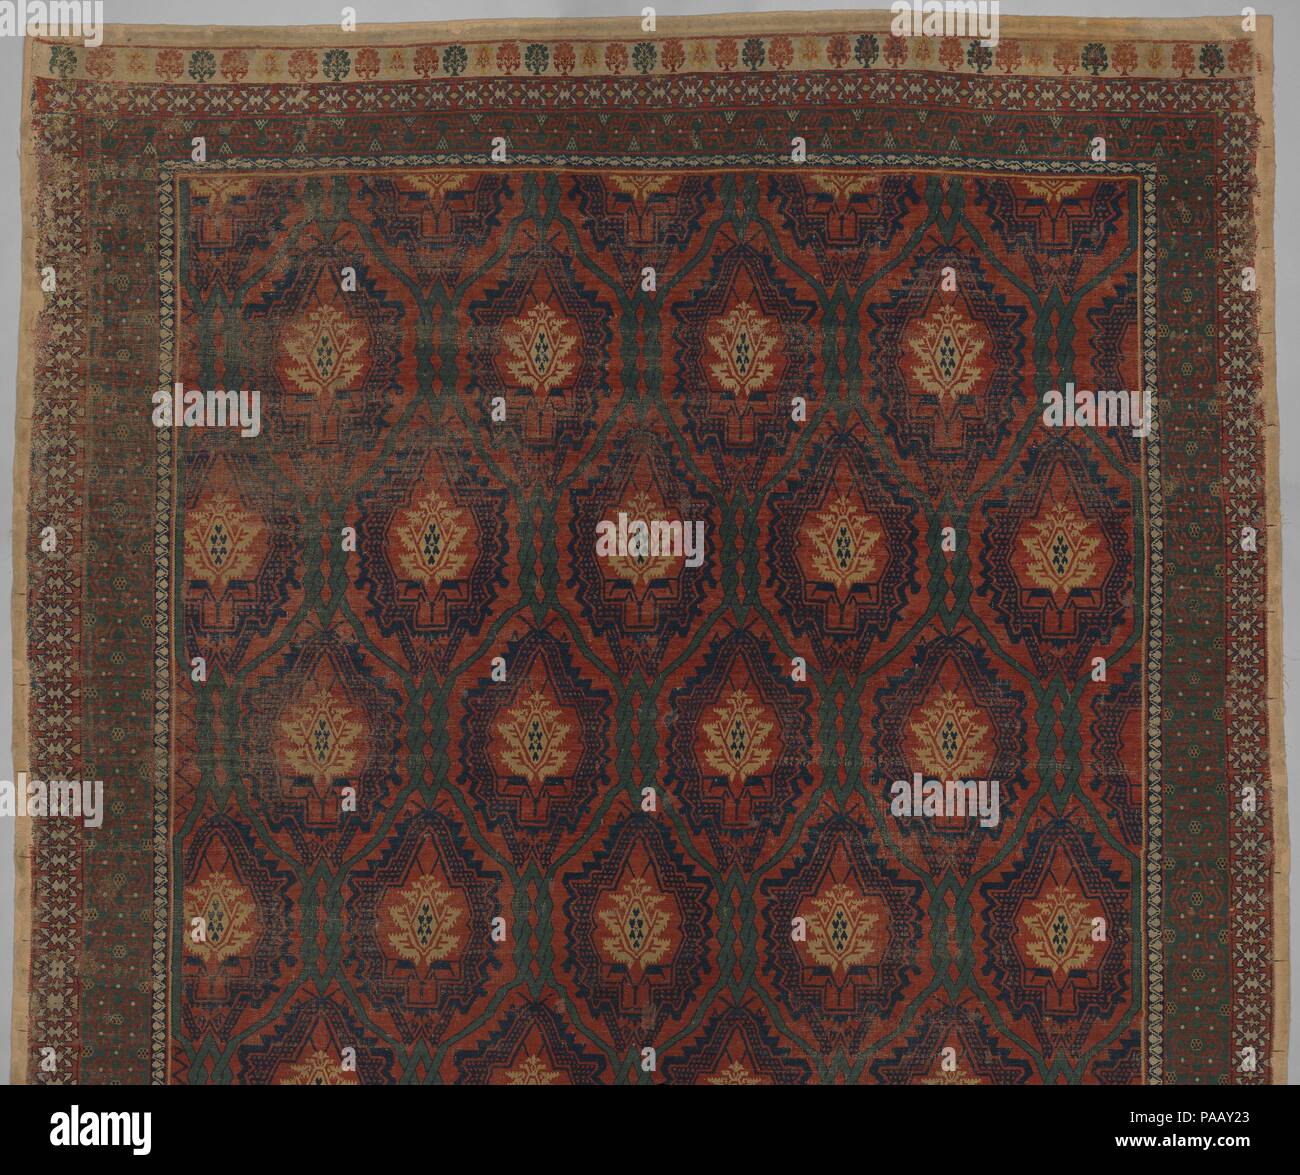 Rug. Culture: Spanish. Dimensions: Overall: 204 x 95 1/2 in. (518.2 x 242.6 cm). Date: ca. 1470-80. Museum: Metropolitan Museum of Art, New York, USA. Stock Photo